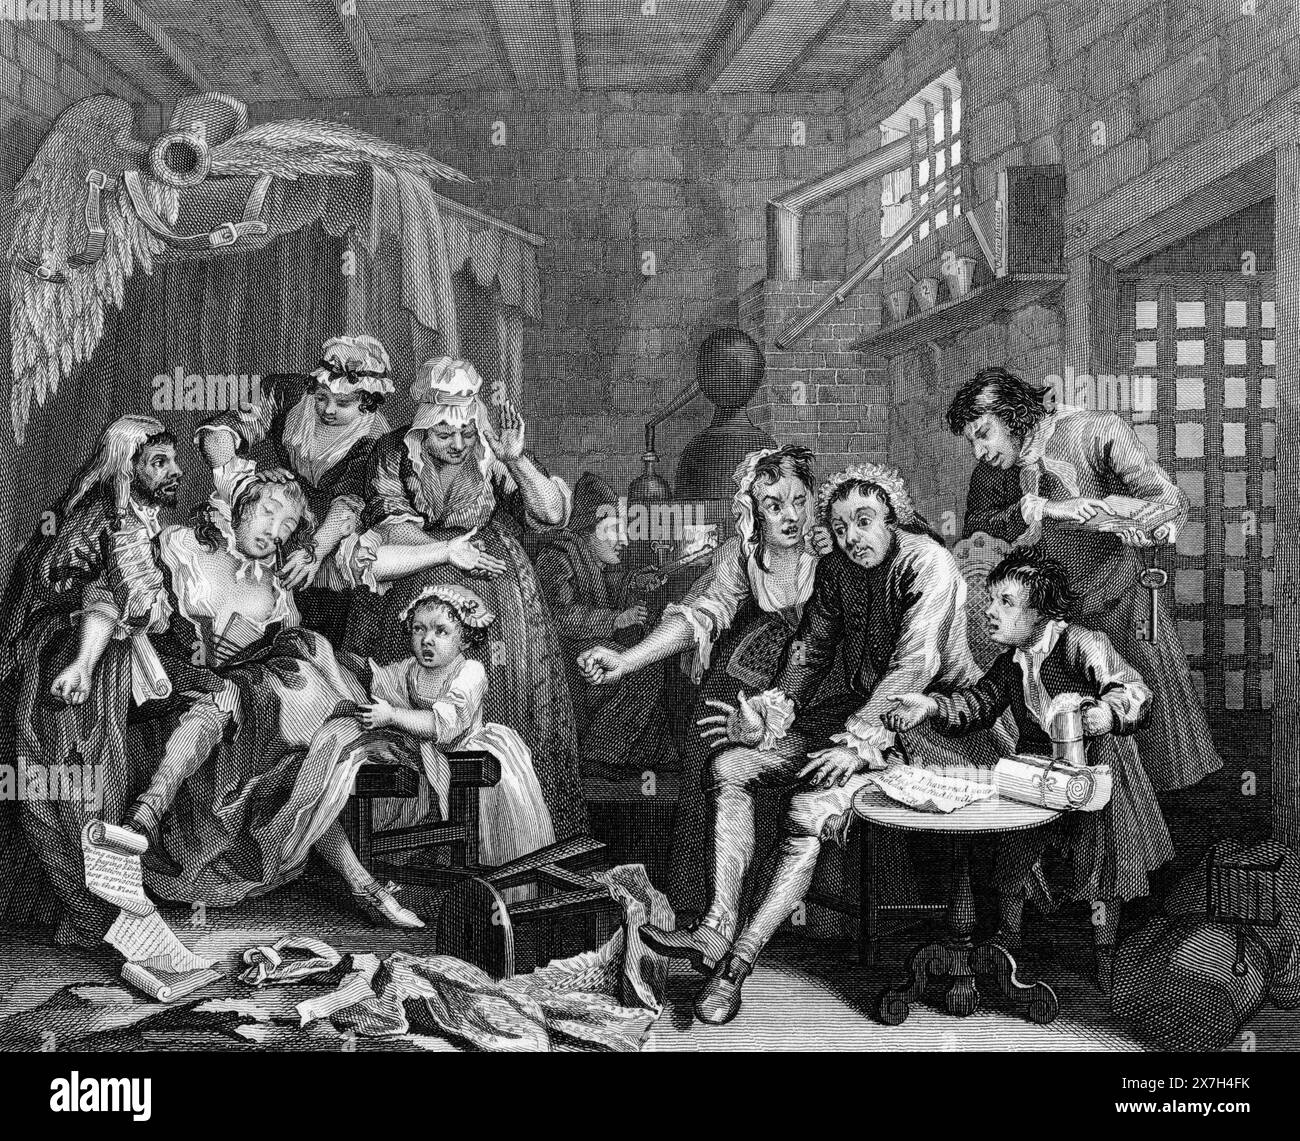 Black and White Illustration: 'Prison Scene'. Engraving after William Hogarth (1697 - 1764)  from his series, 'The Rake's Progress' Stock Photo